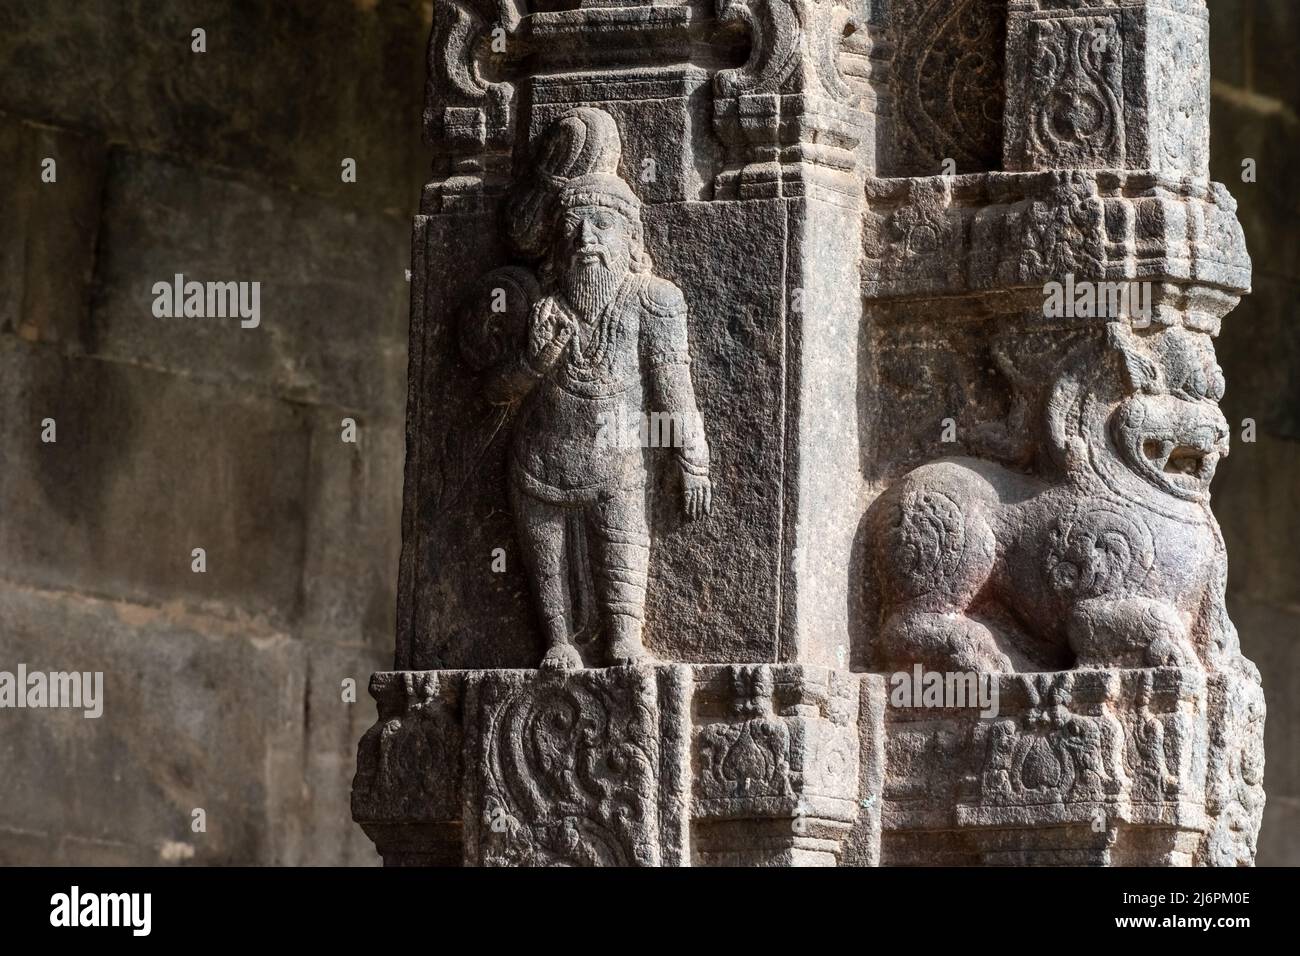 Beautiful stone carvings on the pillars and walls of the ancient Hindu temple of Jalakandeswarar in the Vellore Fort. Stock Photo